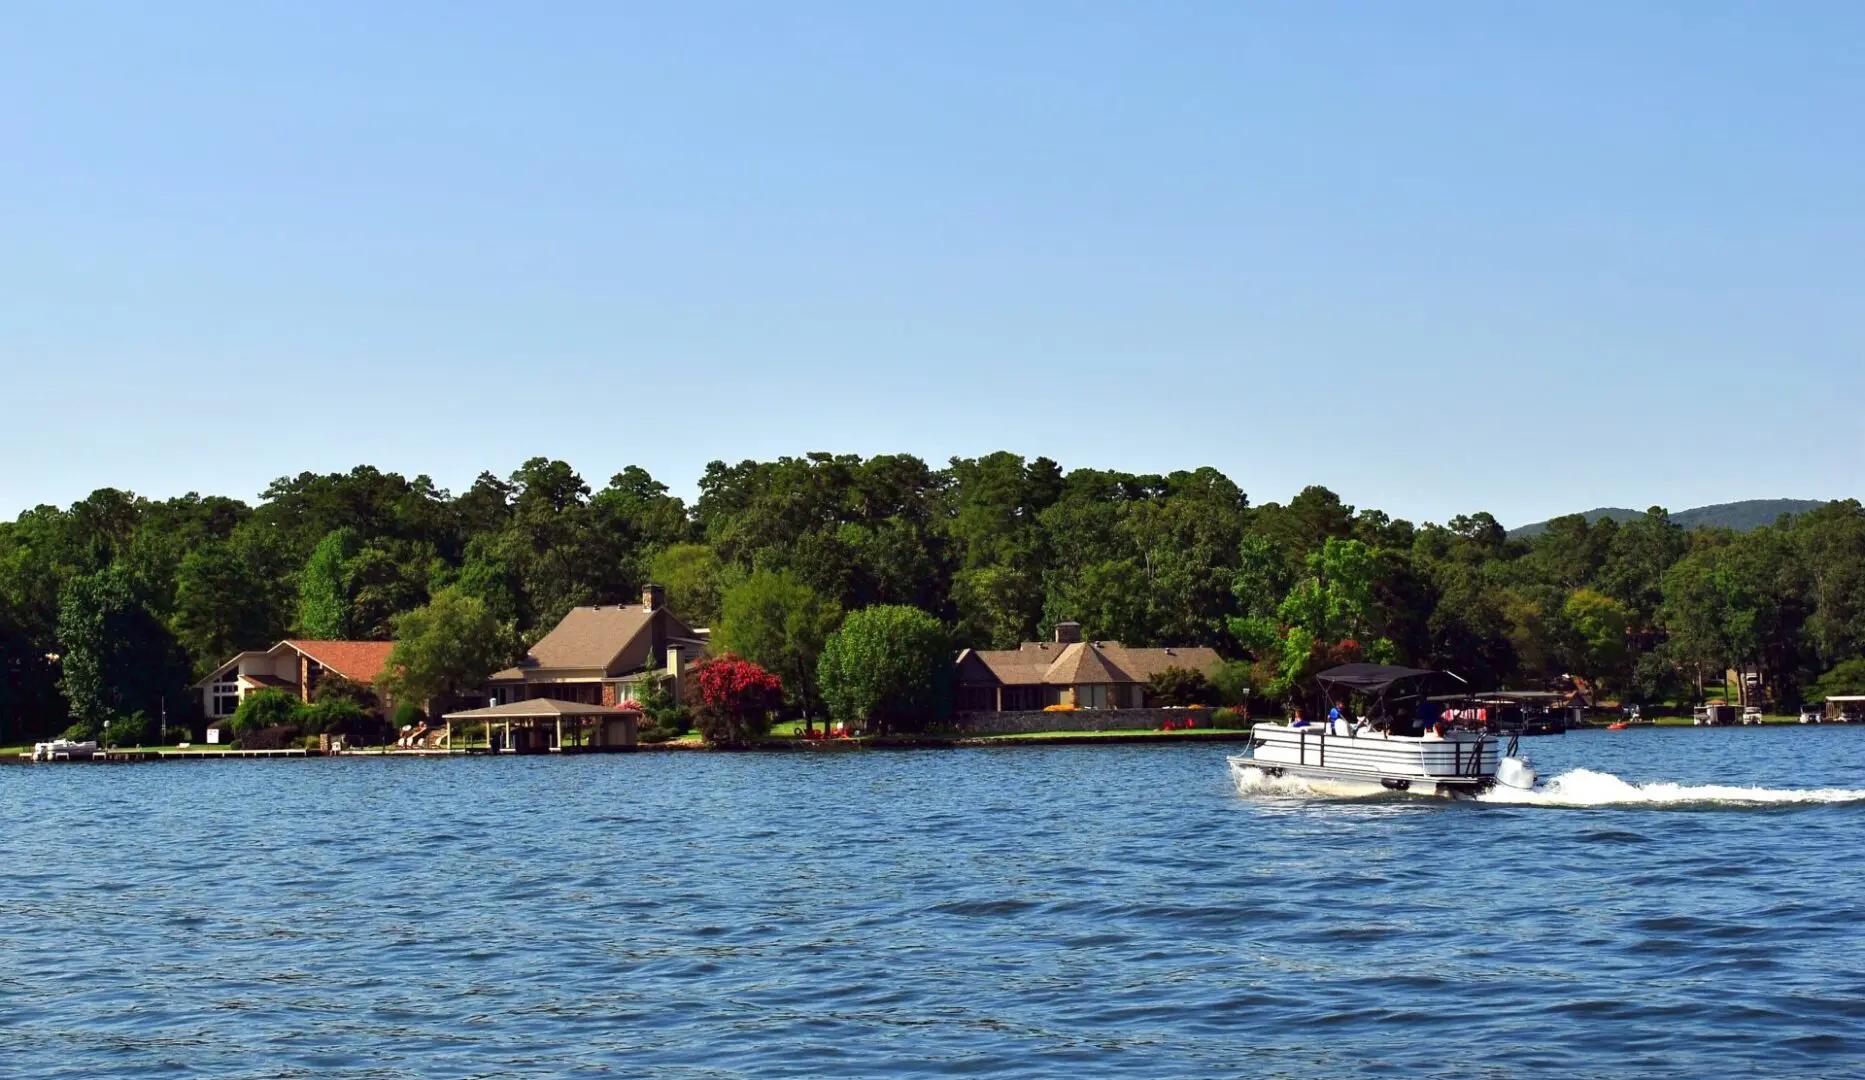 Beautiful scenic view of lake houses on the shoreline with a pontoon boat in the water.